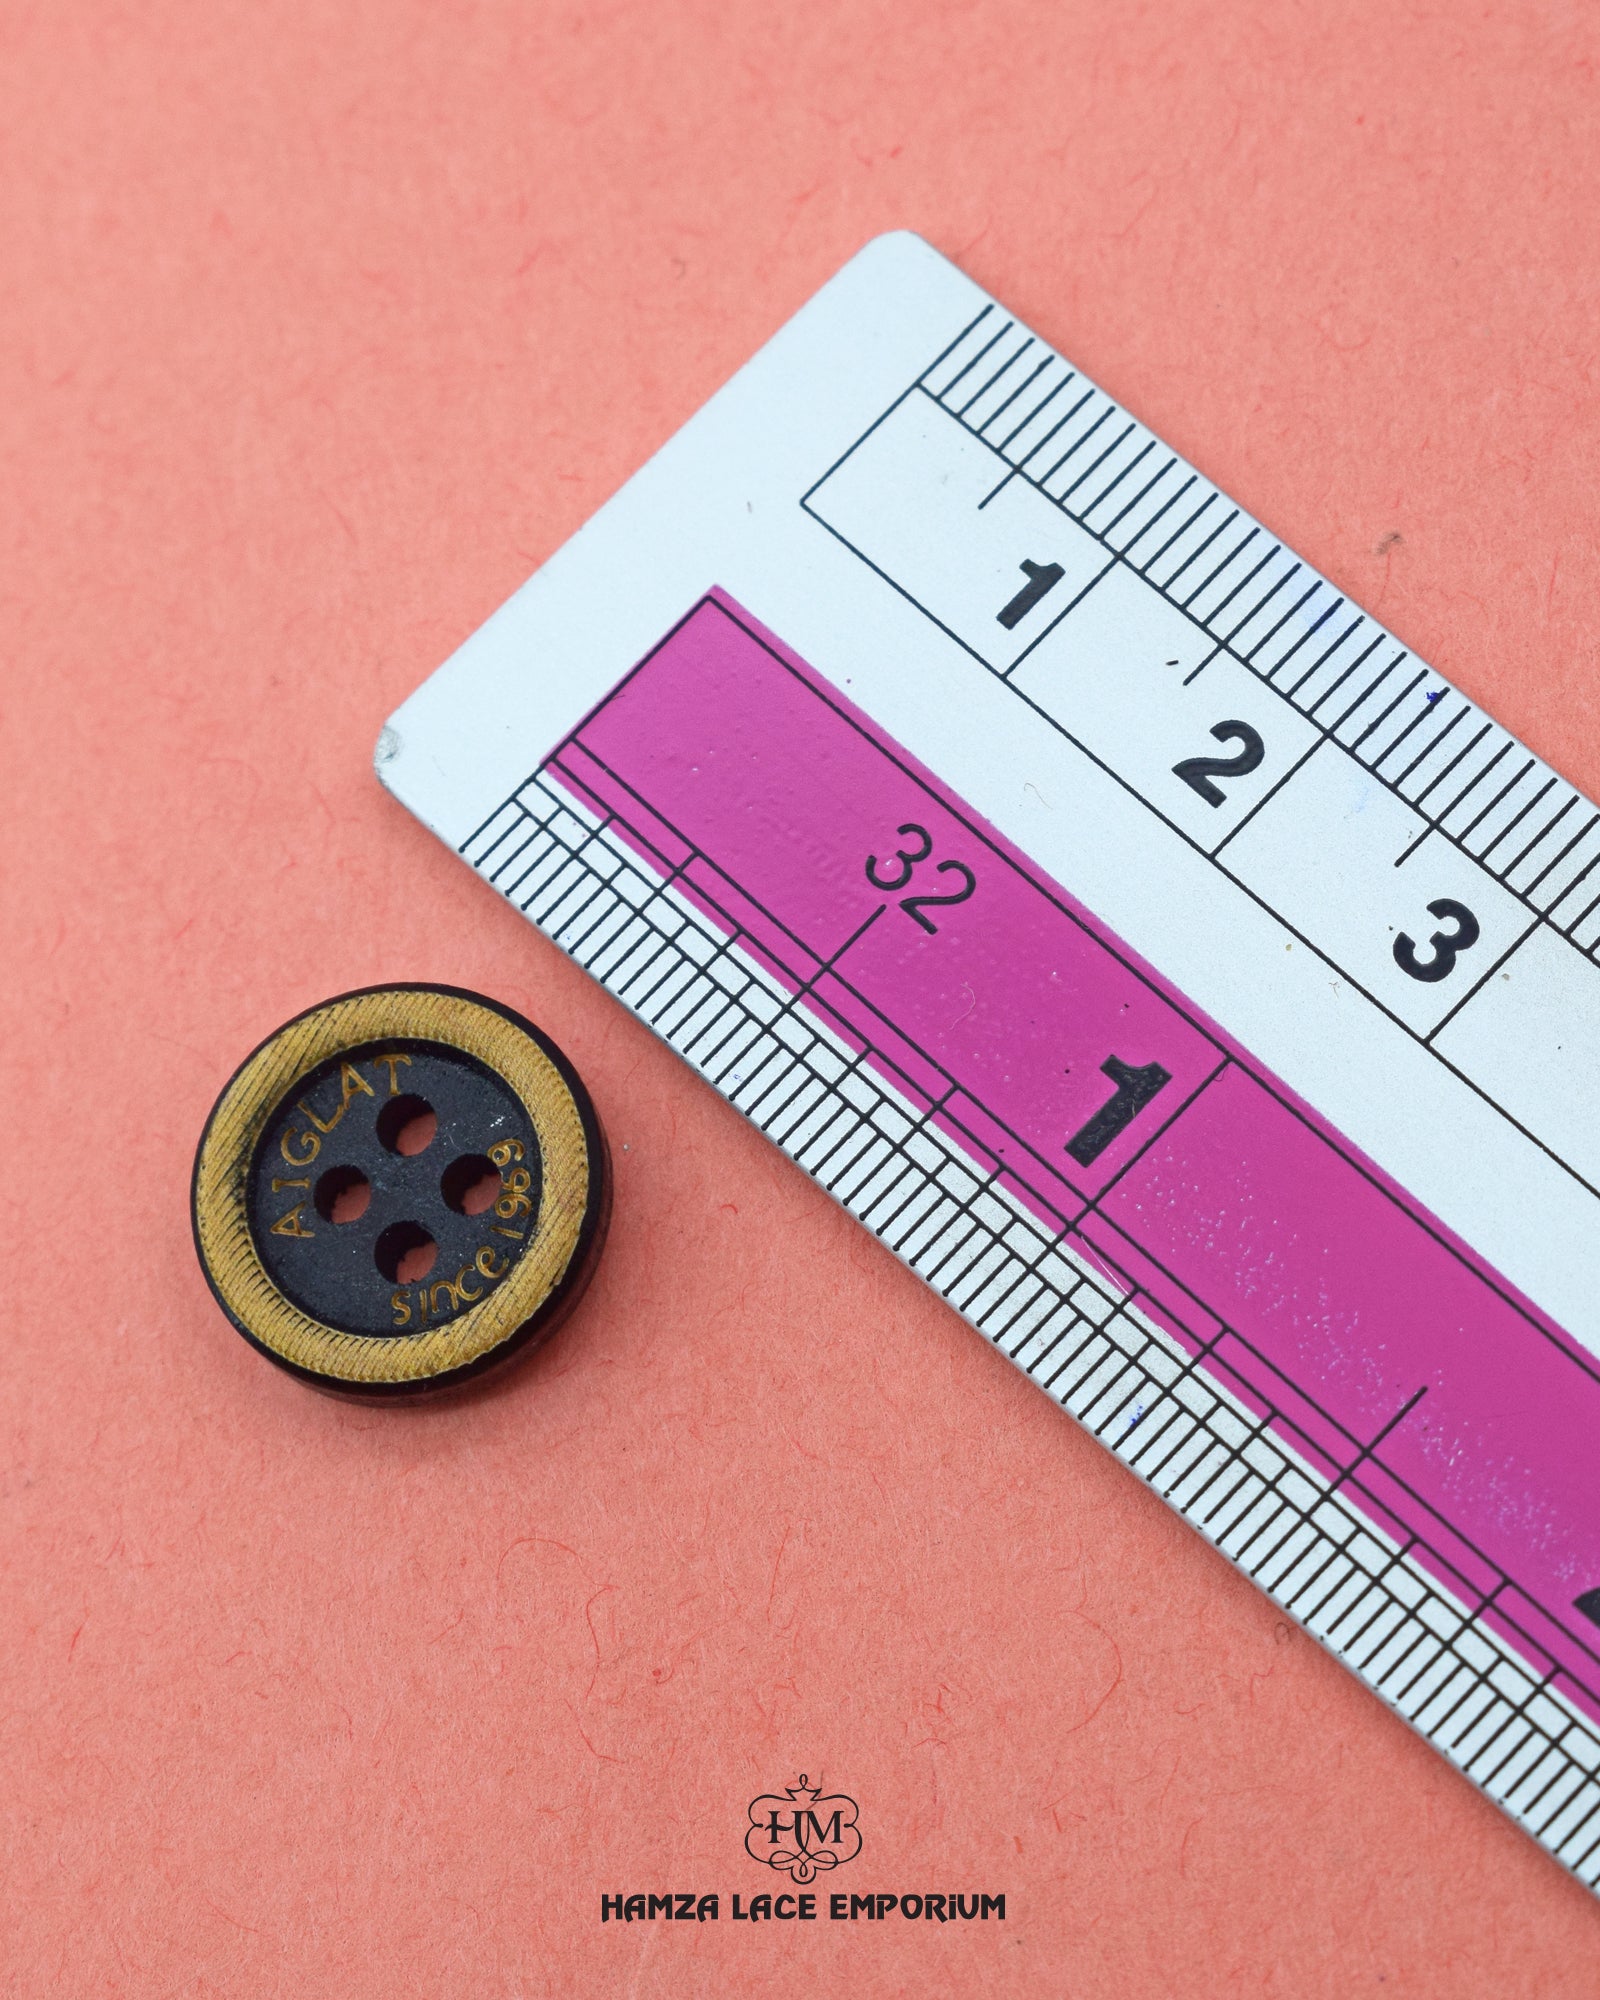 Size of the 'Wood Button WB108' is shown with a ruler